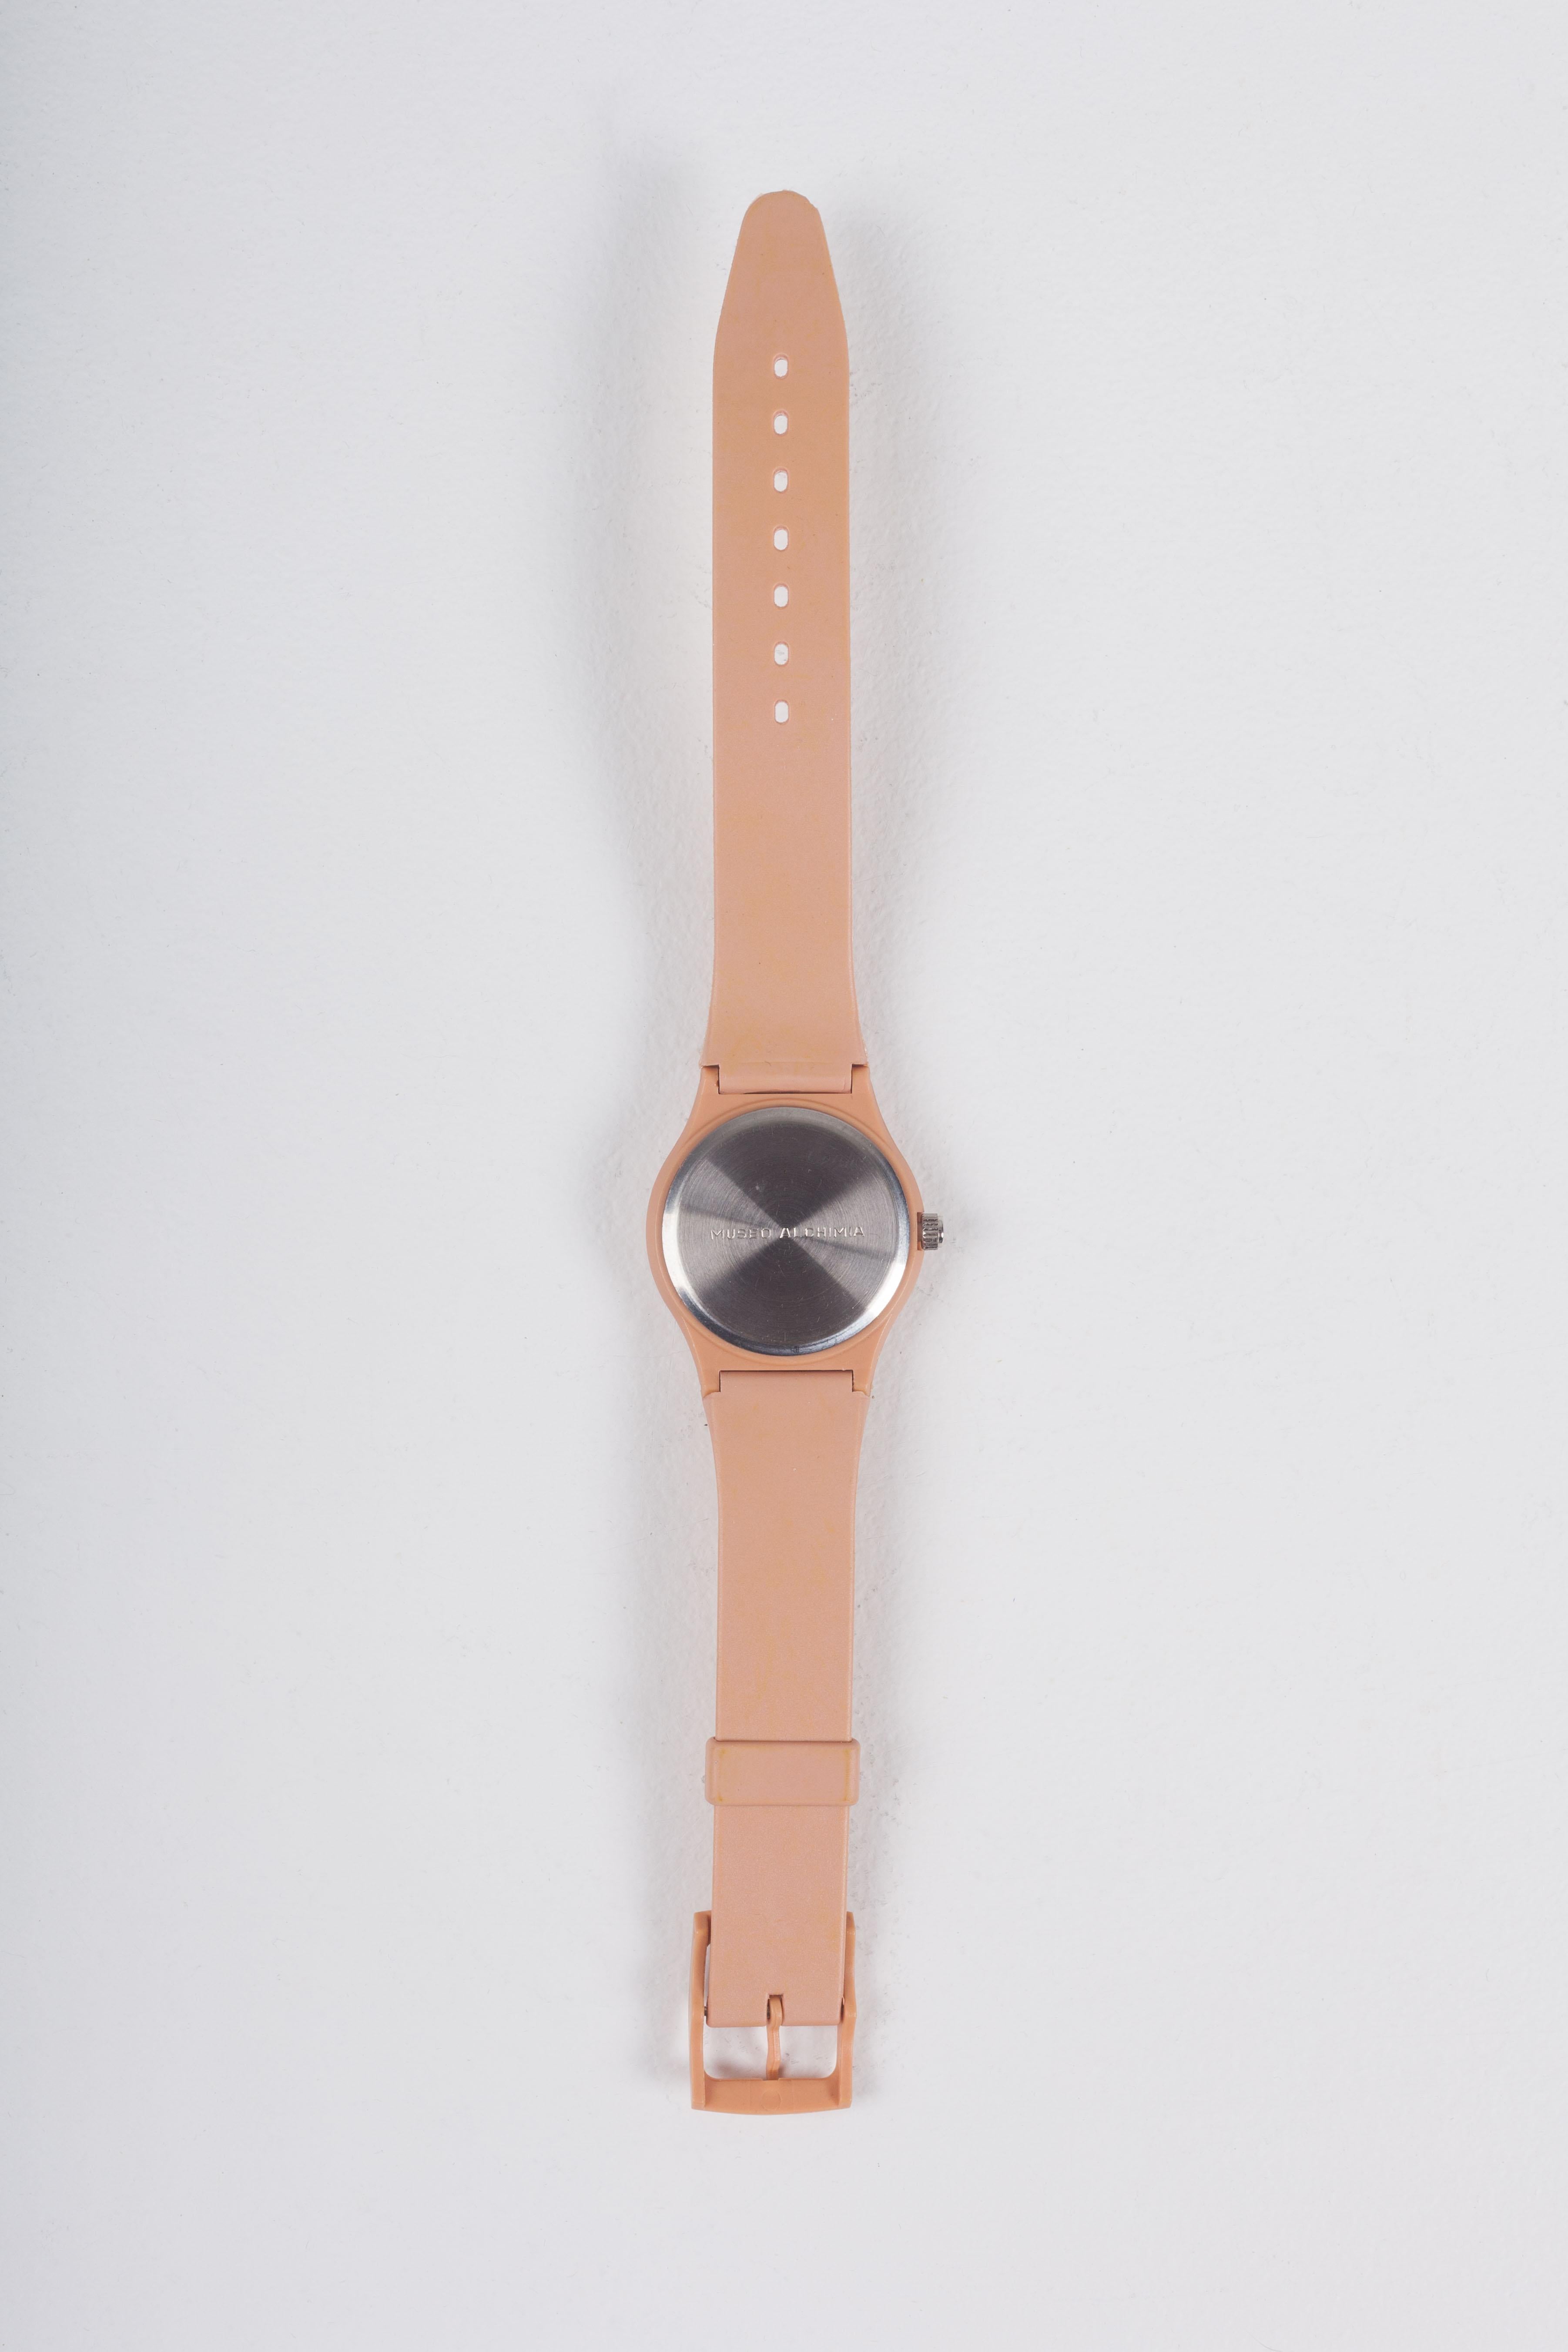 Post-Modern Wristwatch “Ollo” by Museo Alchimia Alessandro Mendini, Italy, 1990 For Sale